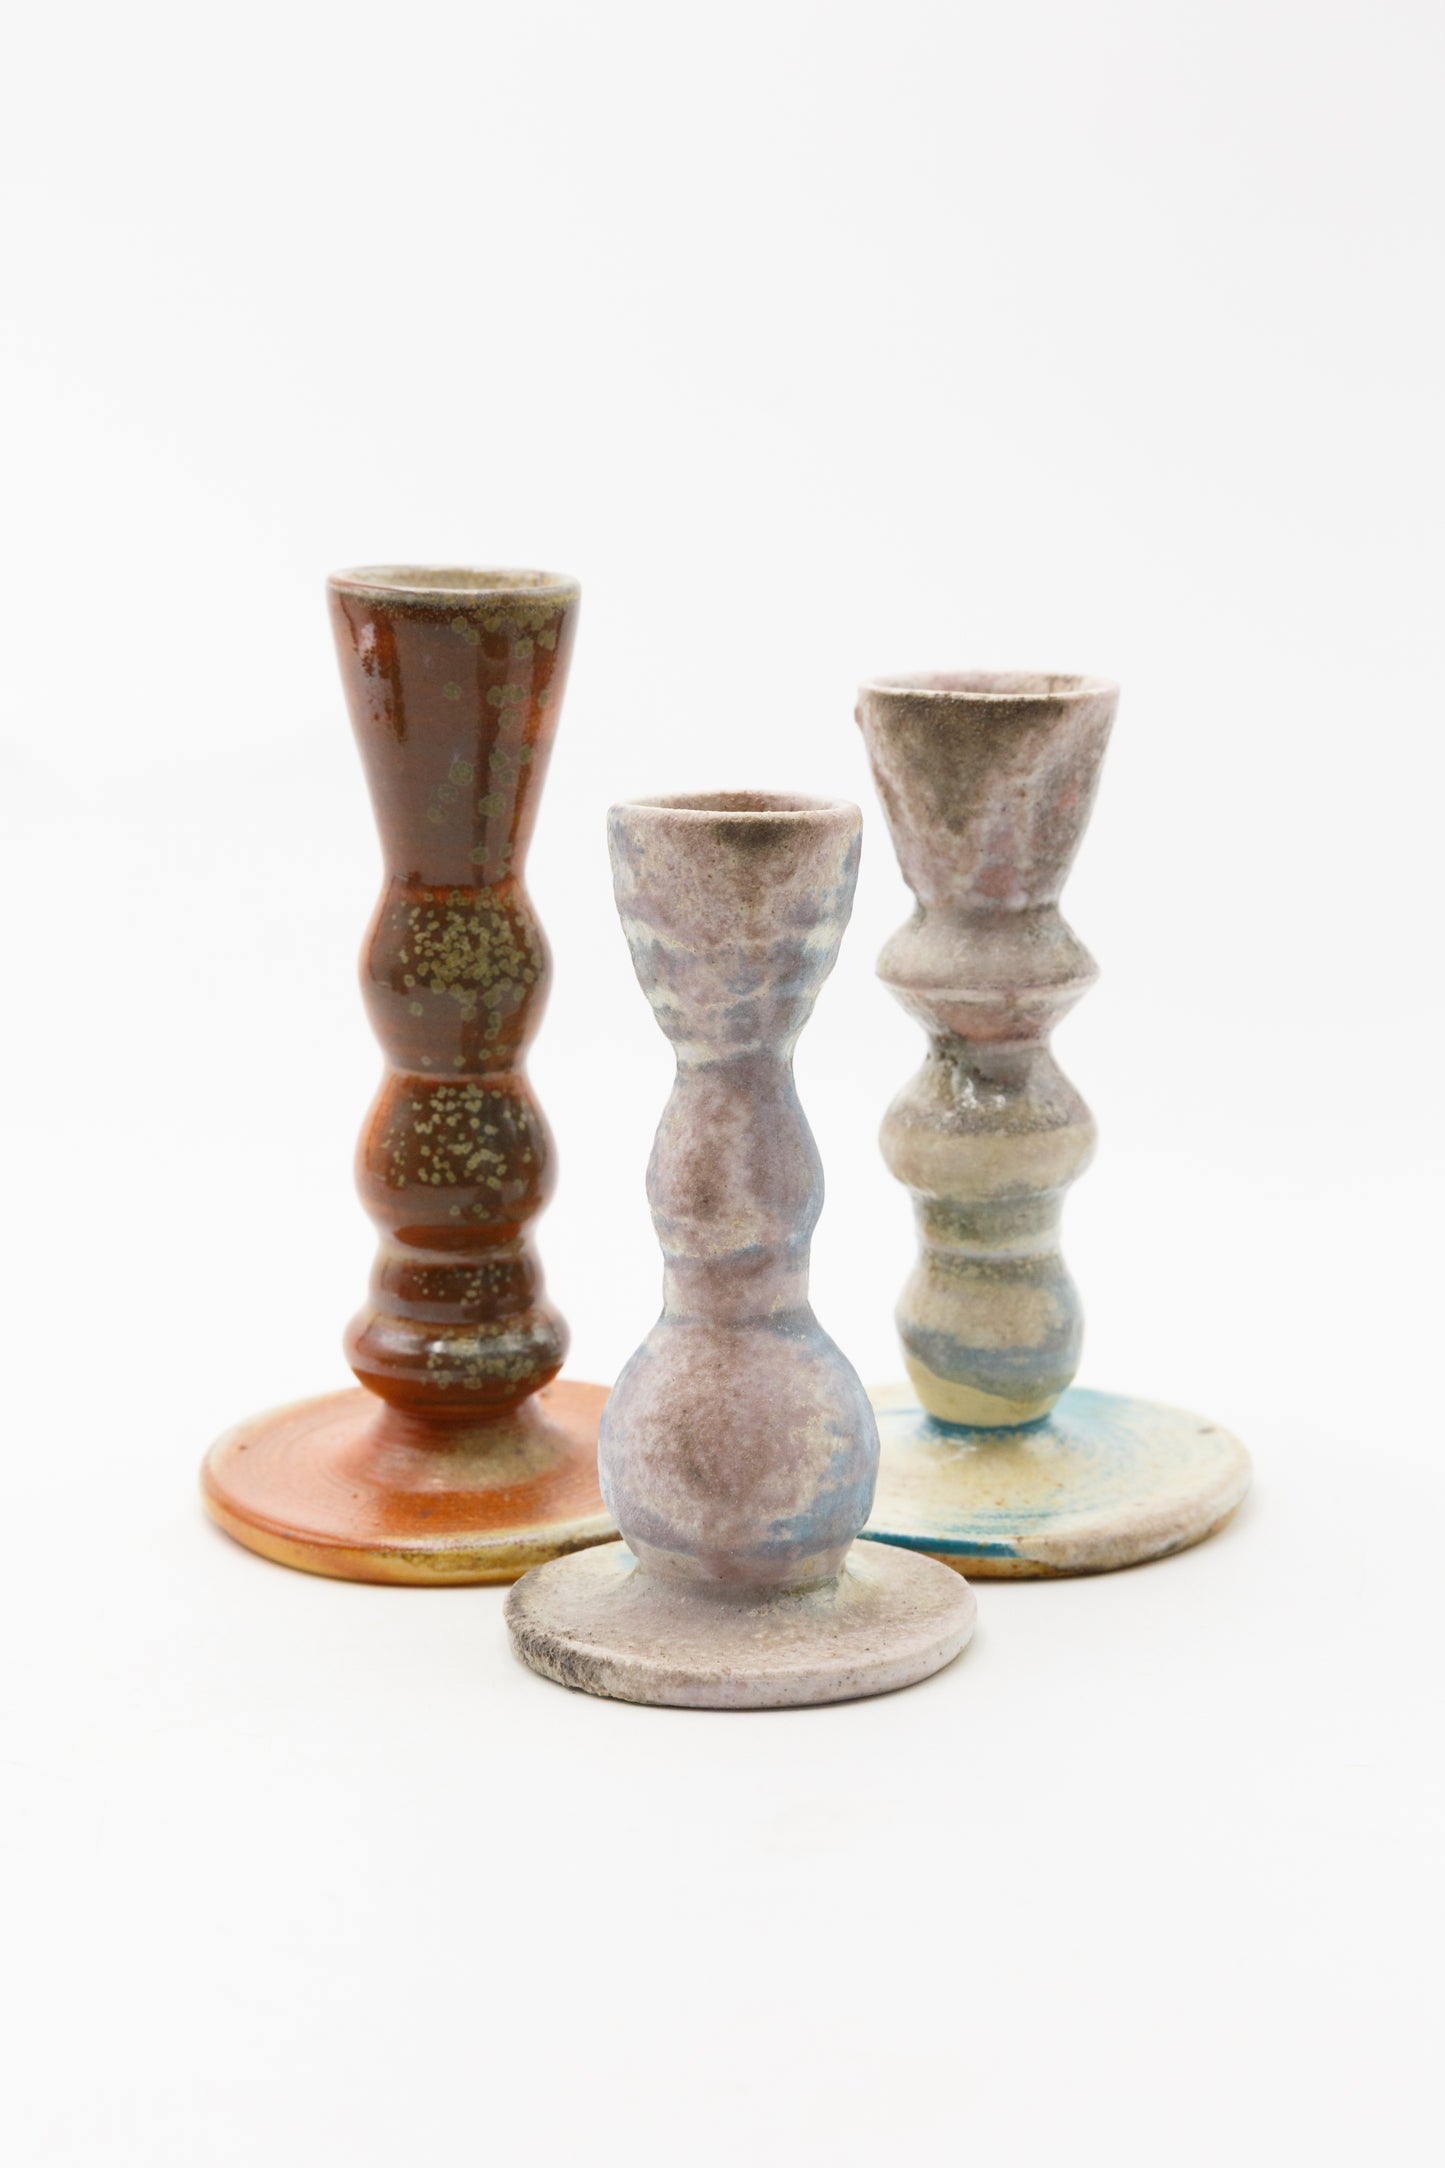 Wood Fired Candlestick 007